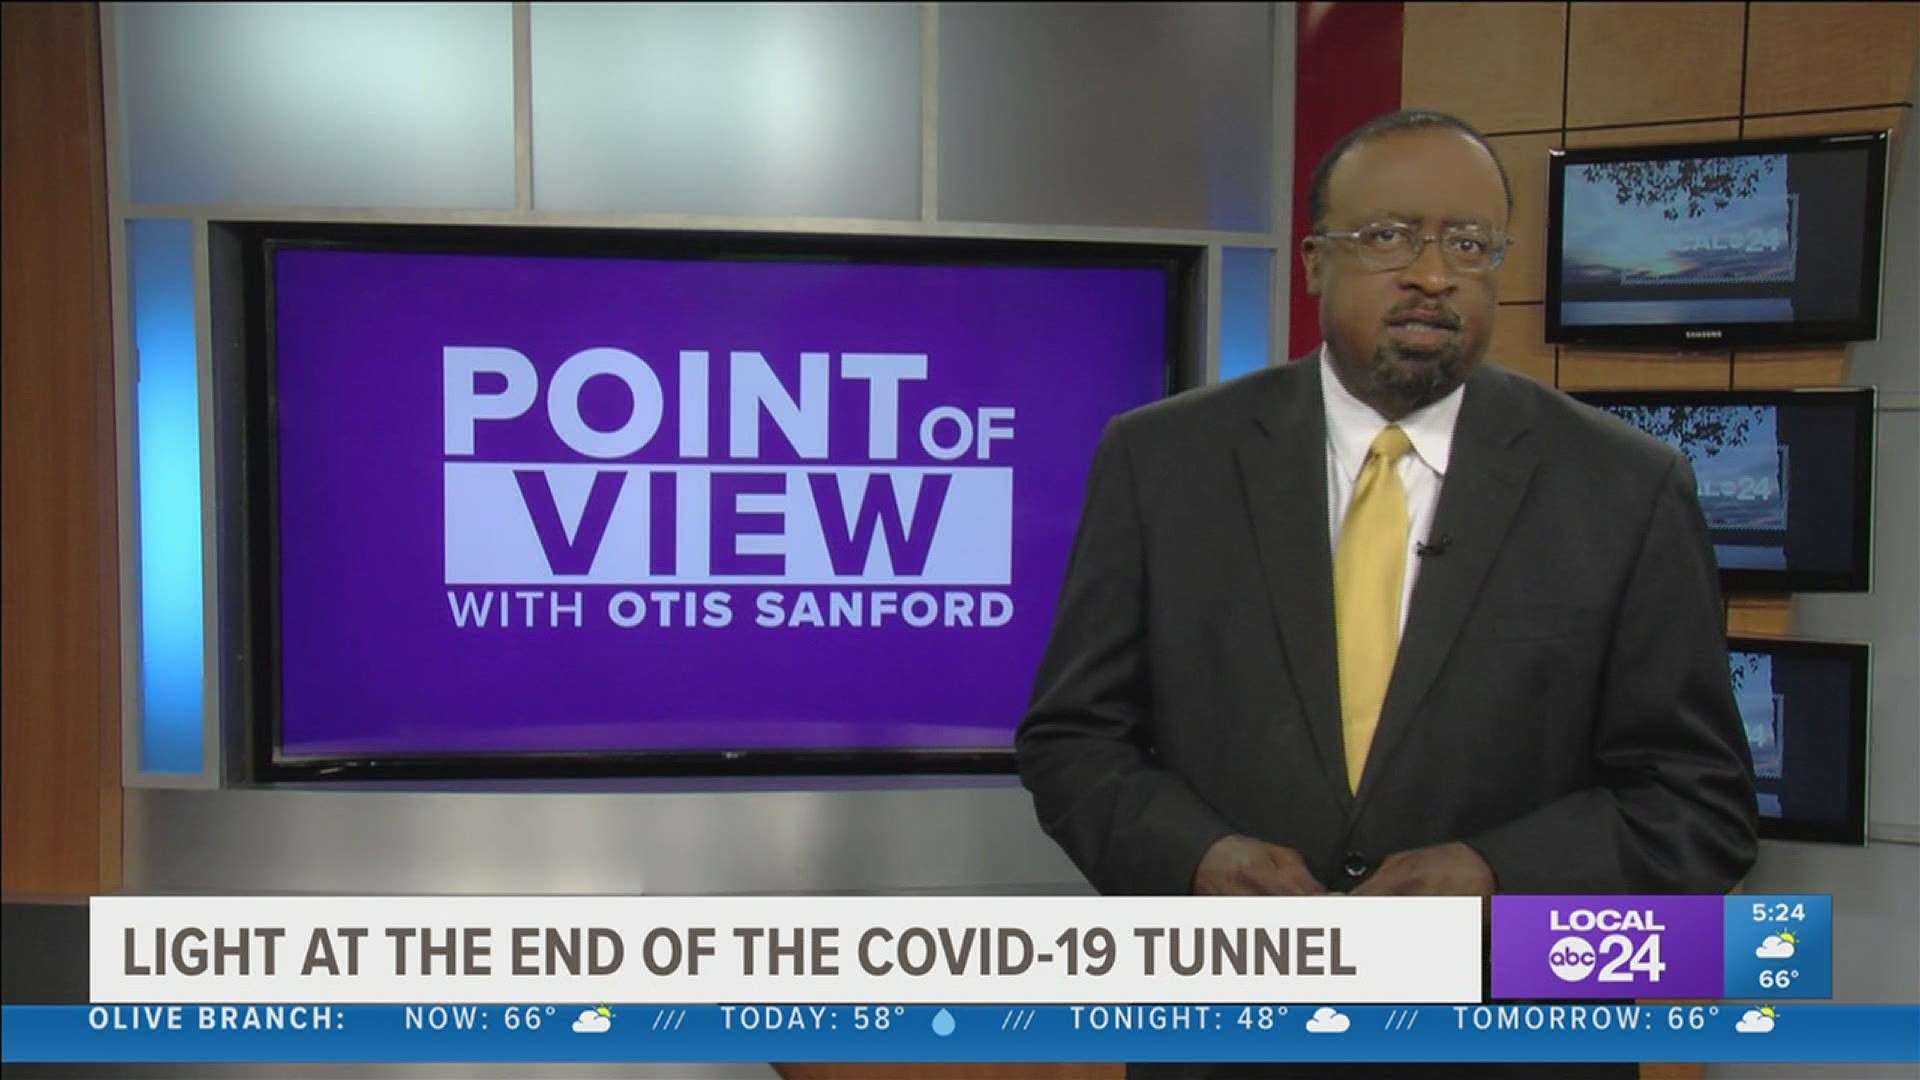 Local 24 News political analyst and commentator Otis Sanford shares his point of view on relaxed COVID-19 restrictions in Shelby County.